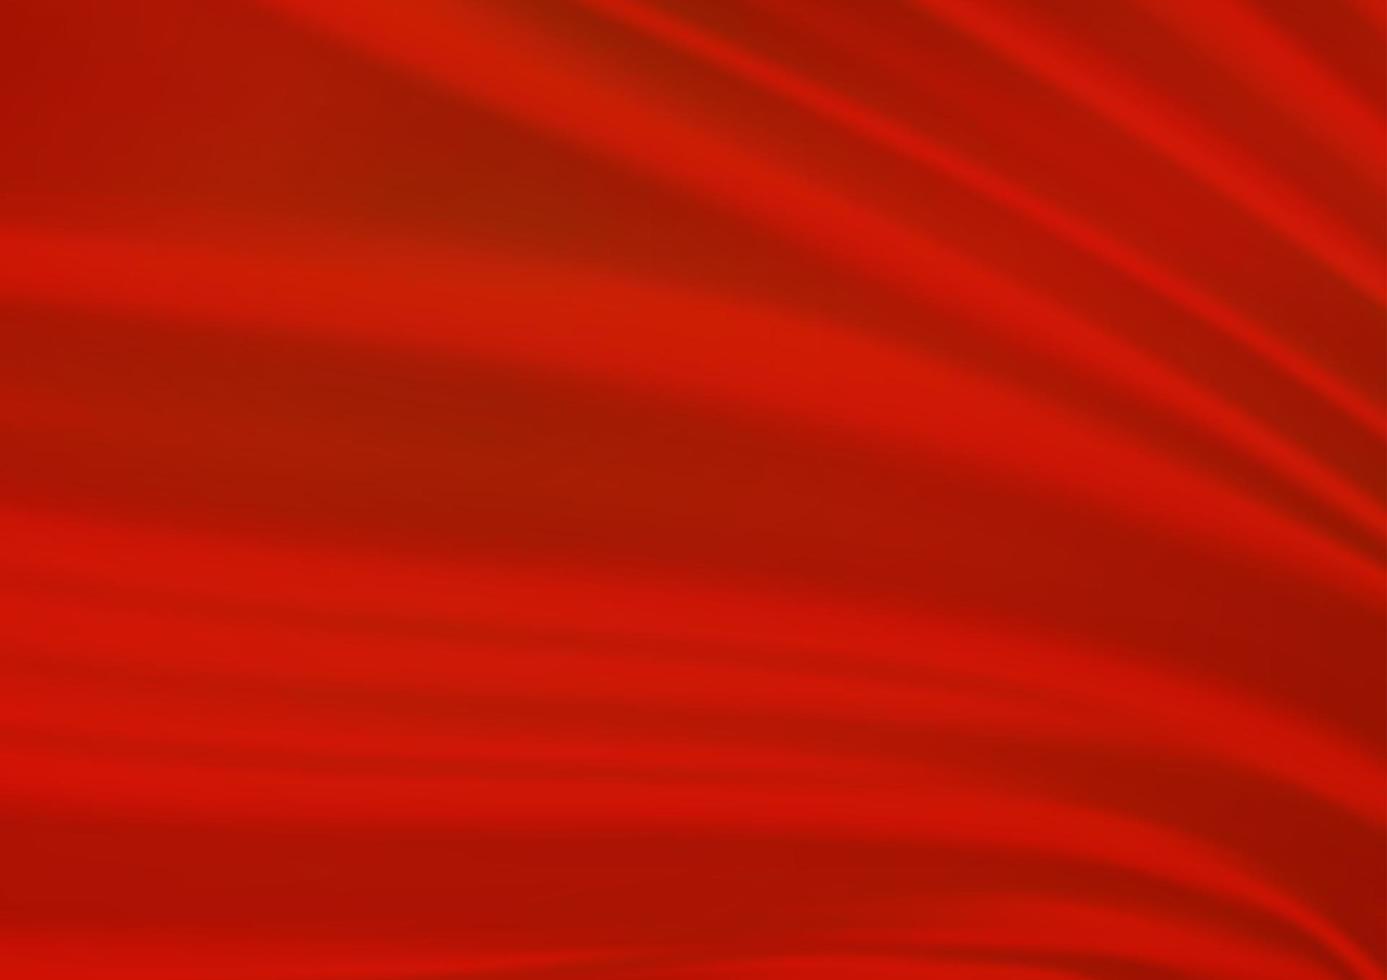 Light Red vector blurred shine abstract template.